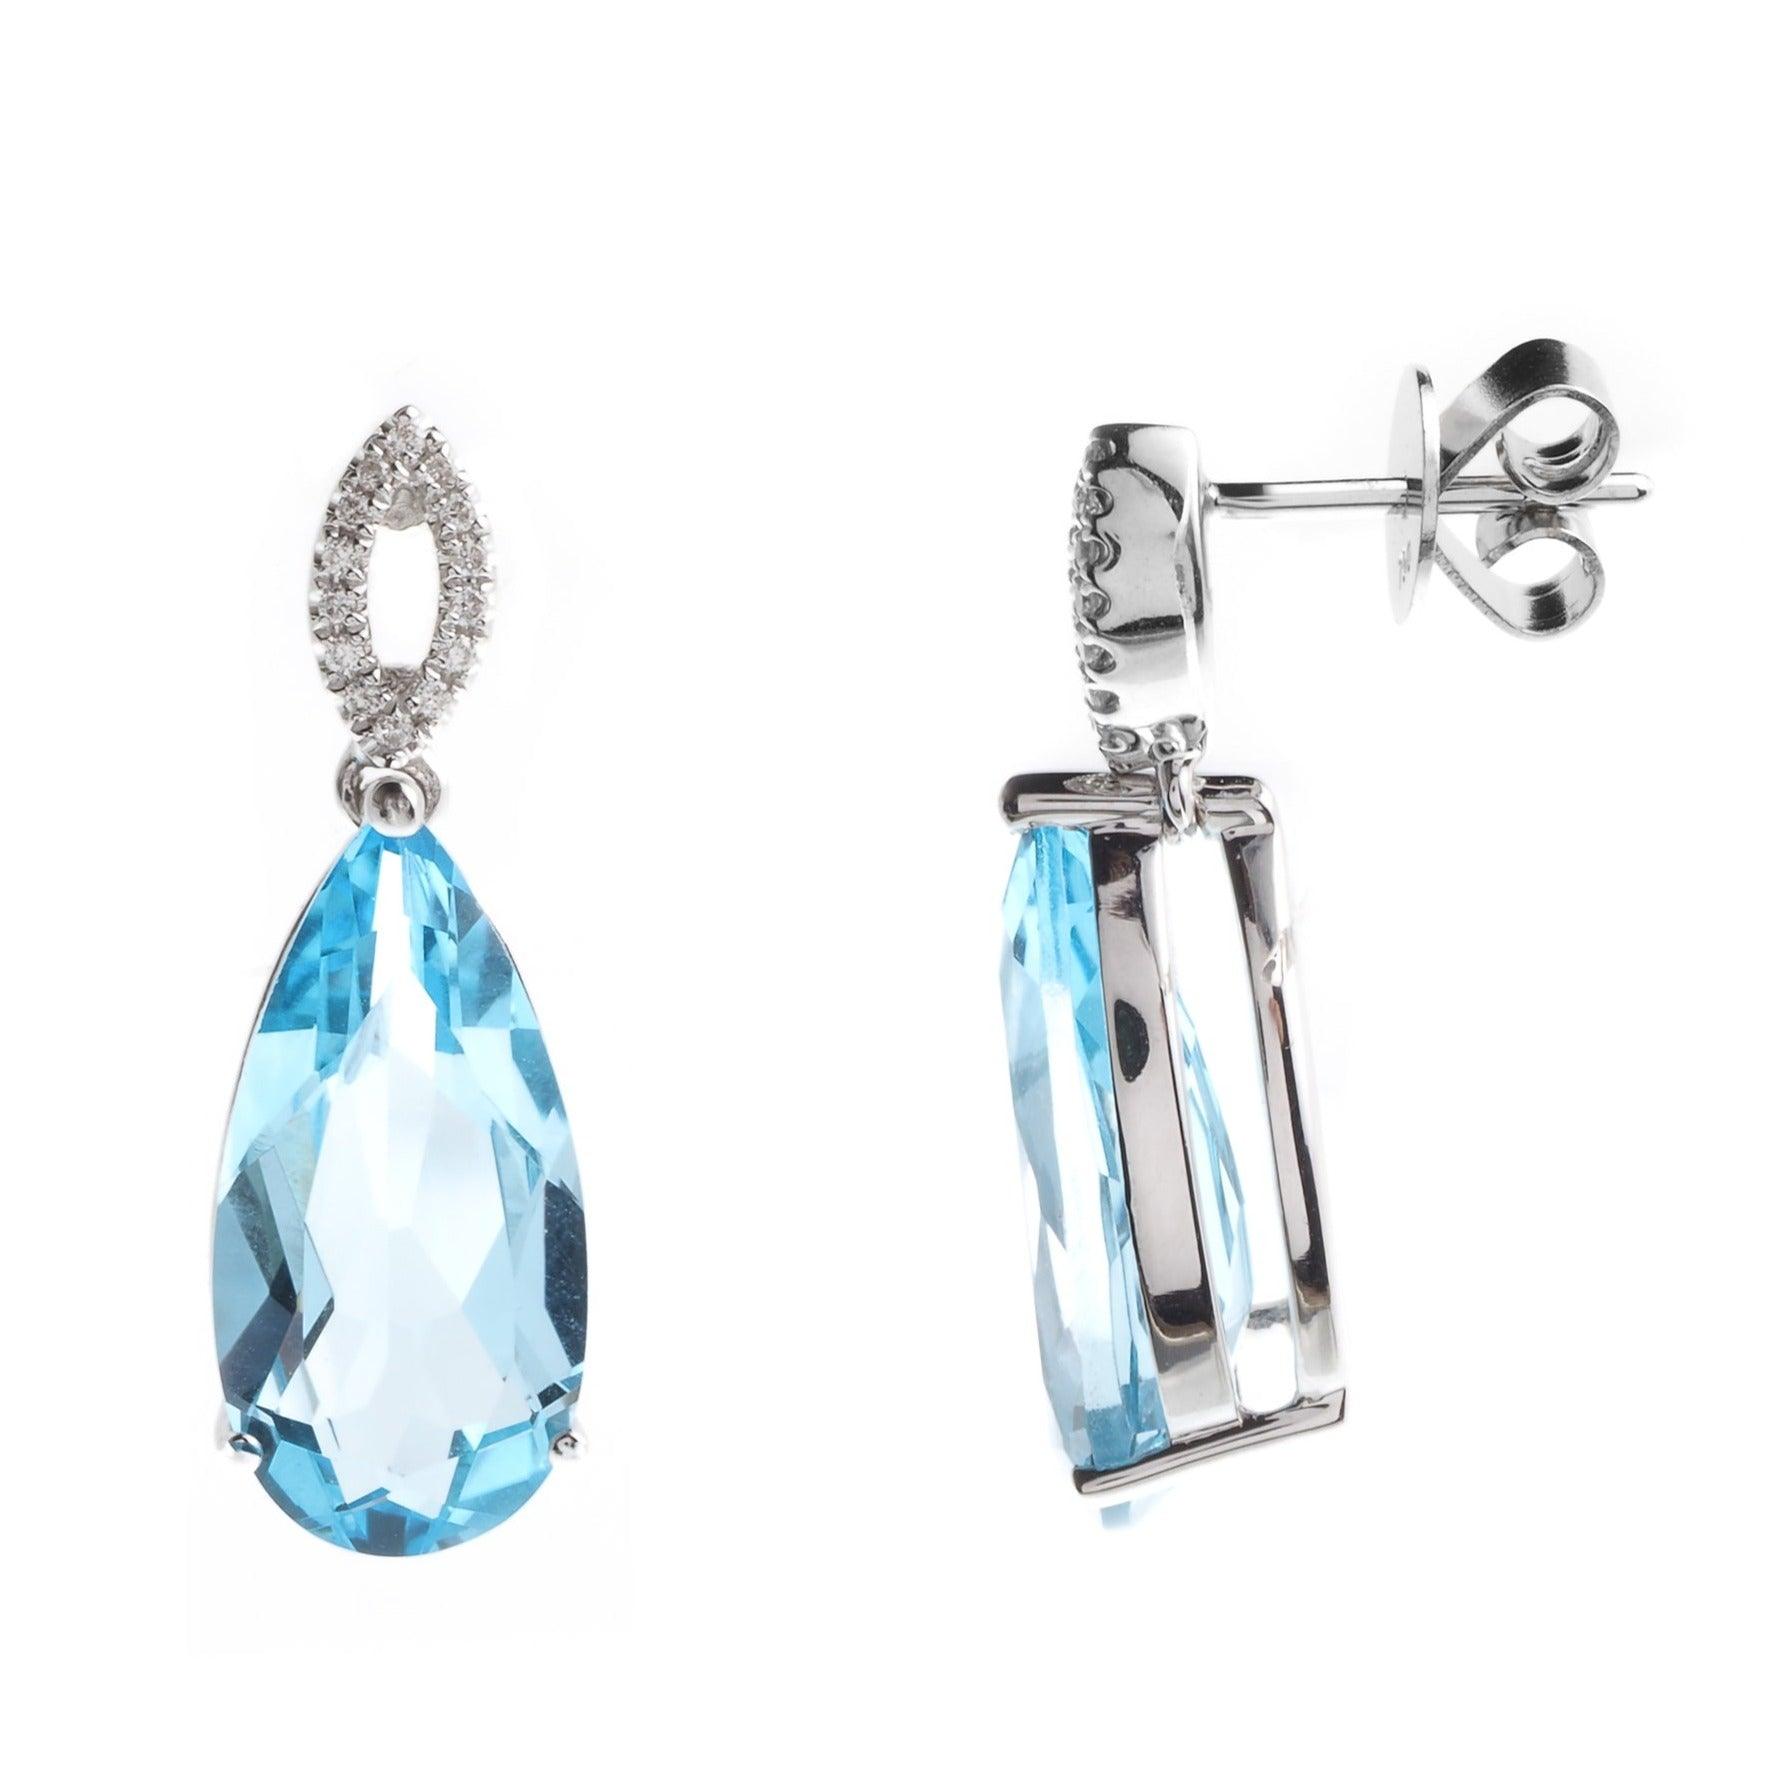 18ct White Gold Diamond and Blue Topaz Drop Earrings with push backs E32082-22